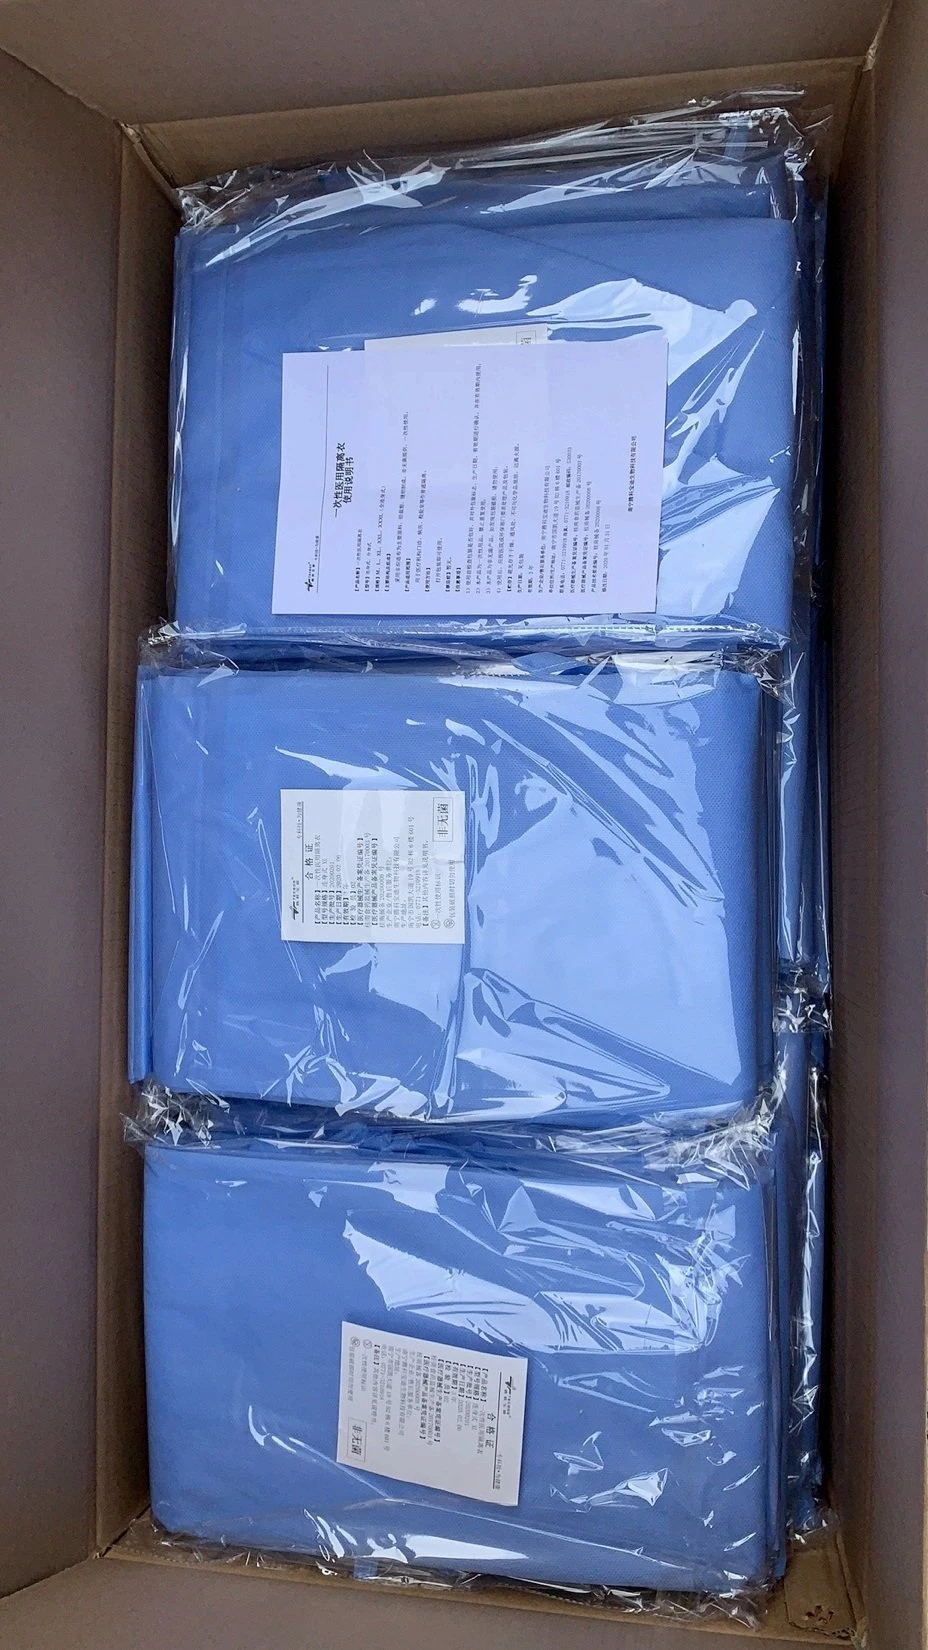 Disposable Non-Woven Surgical Gown, Disposable Sterile Nonwoven Surgical Gown, Disposable Green AAMI Protective Gown